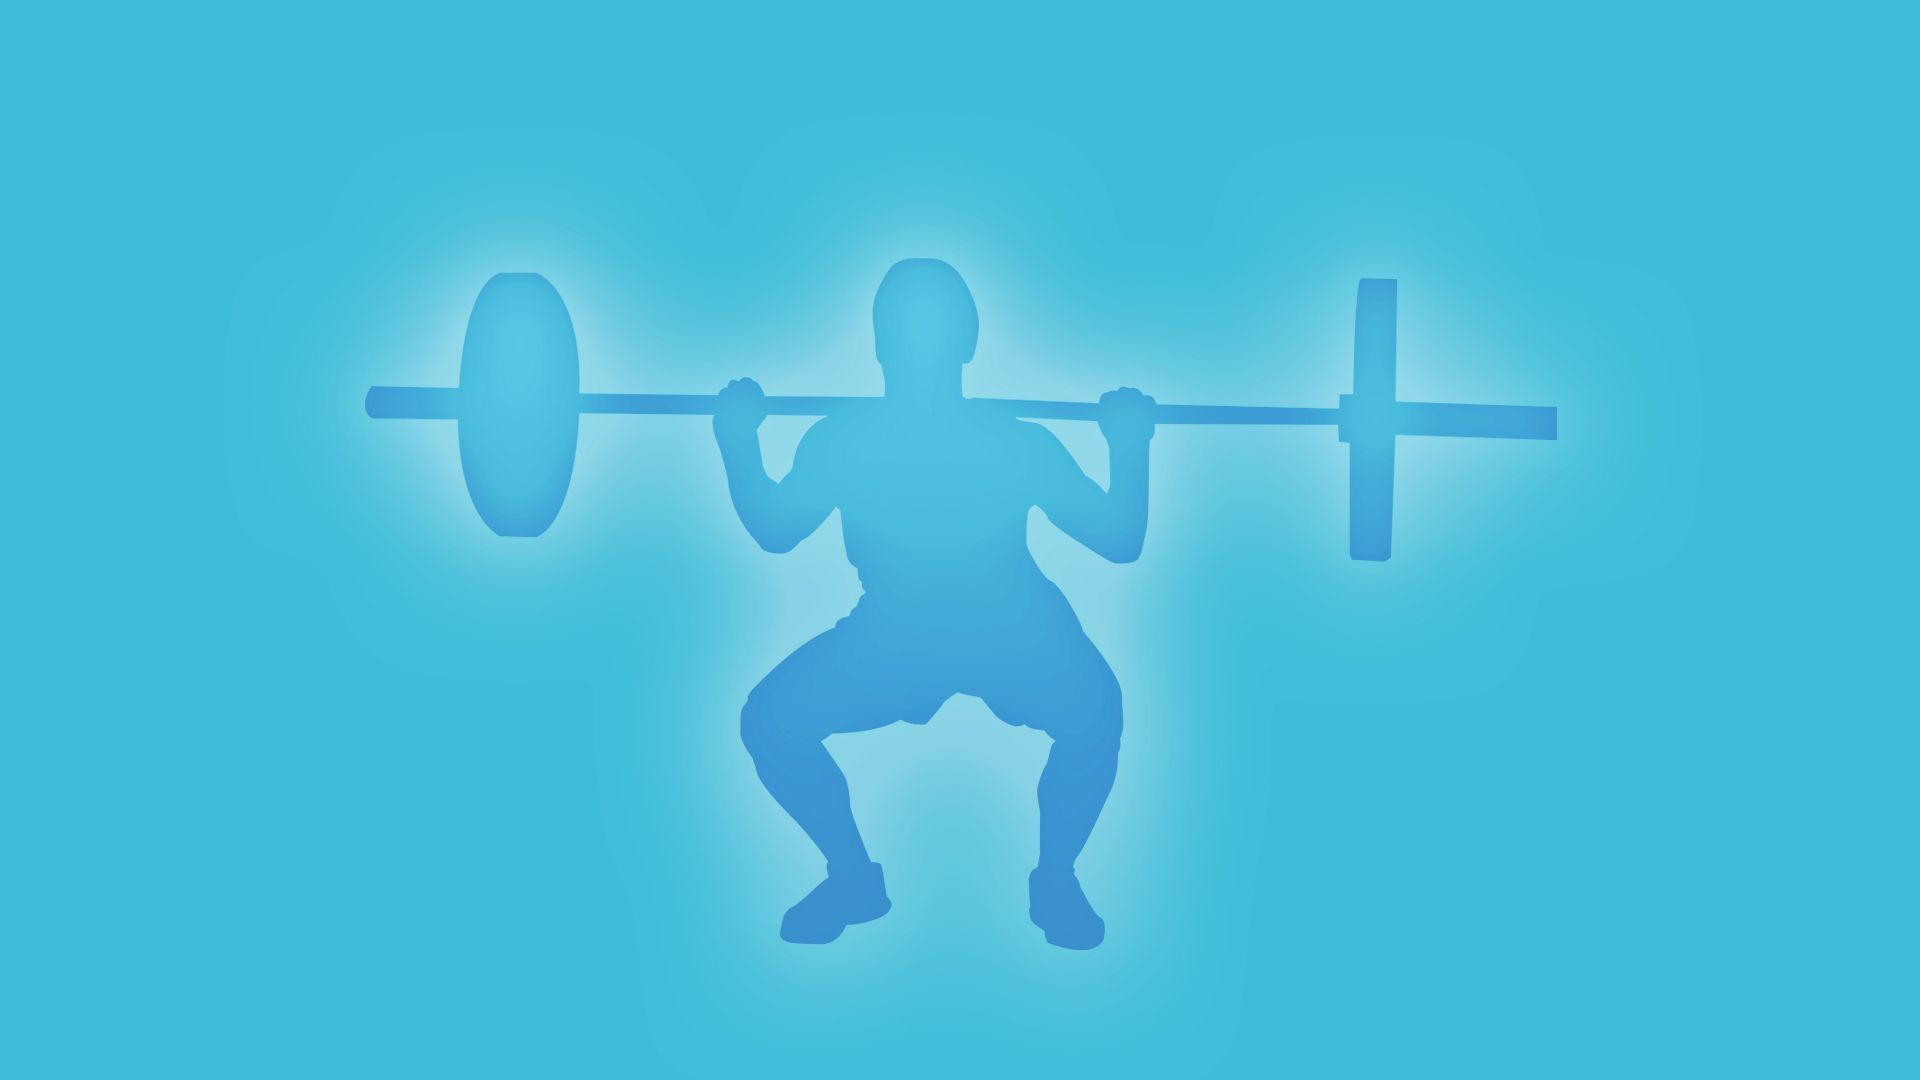 Illustration of a glowing silhouette of a person squatting with a barbell